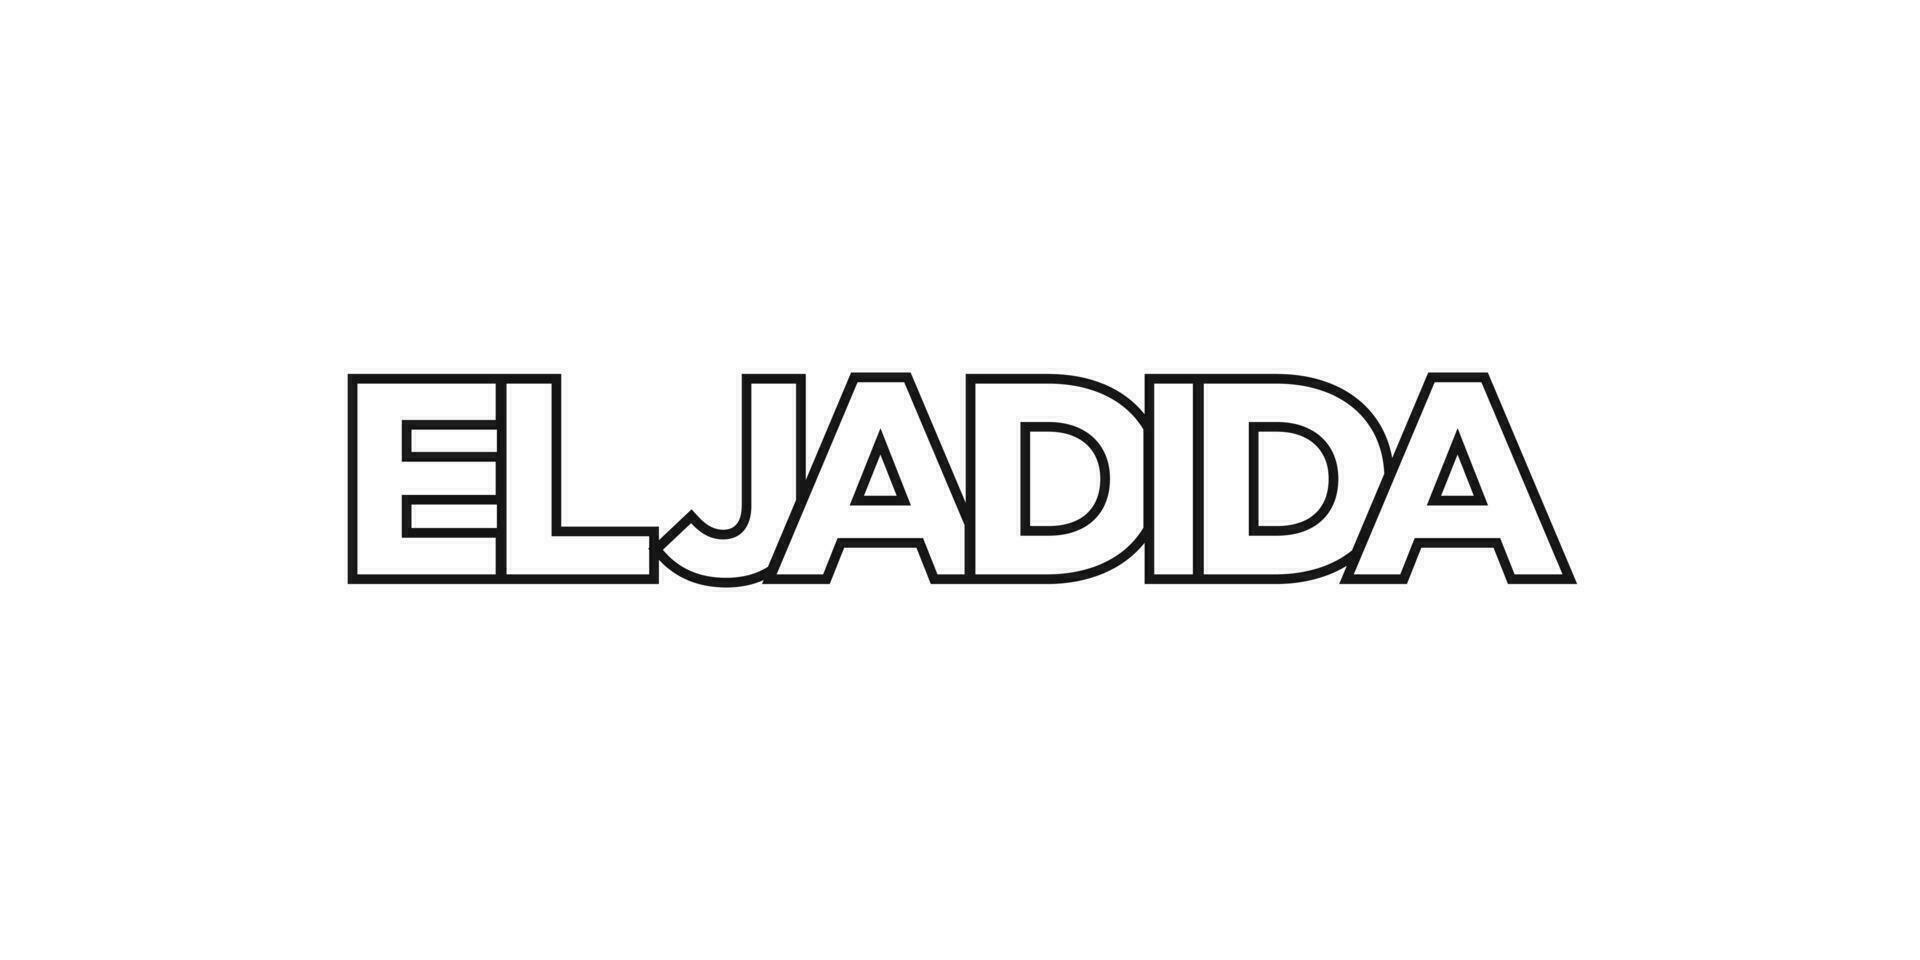 El Jadida in the Morocco emblem. The design features a geometric style, vector illustration with bold typography in a modern font. The graphic slogan lettering.